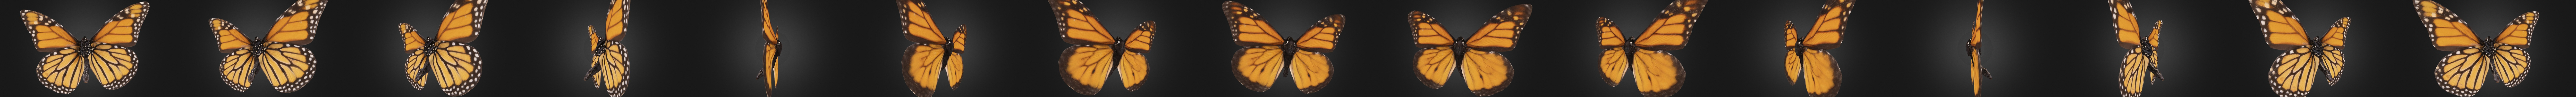 Download Monarch Butterfly Download Free 3d Model By Virginiatechunivlibraries Virginiatechunivlibraries 3a5fc9a